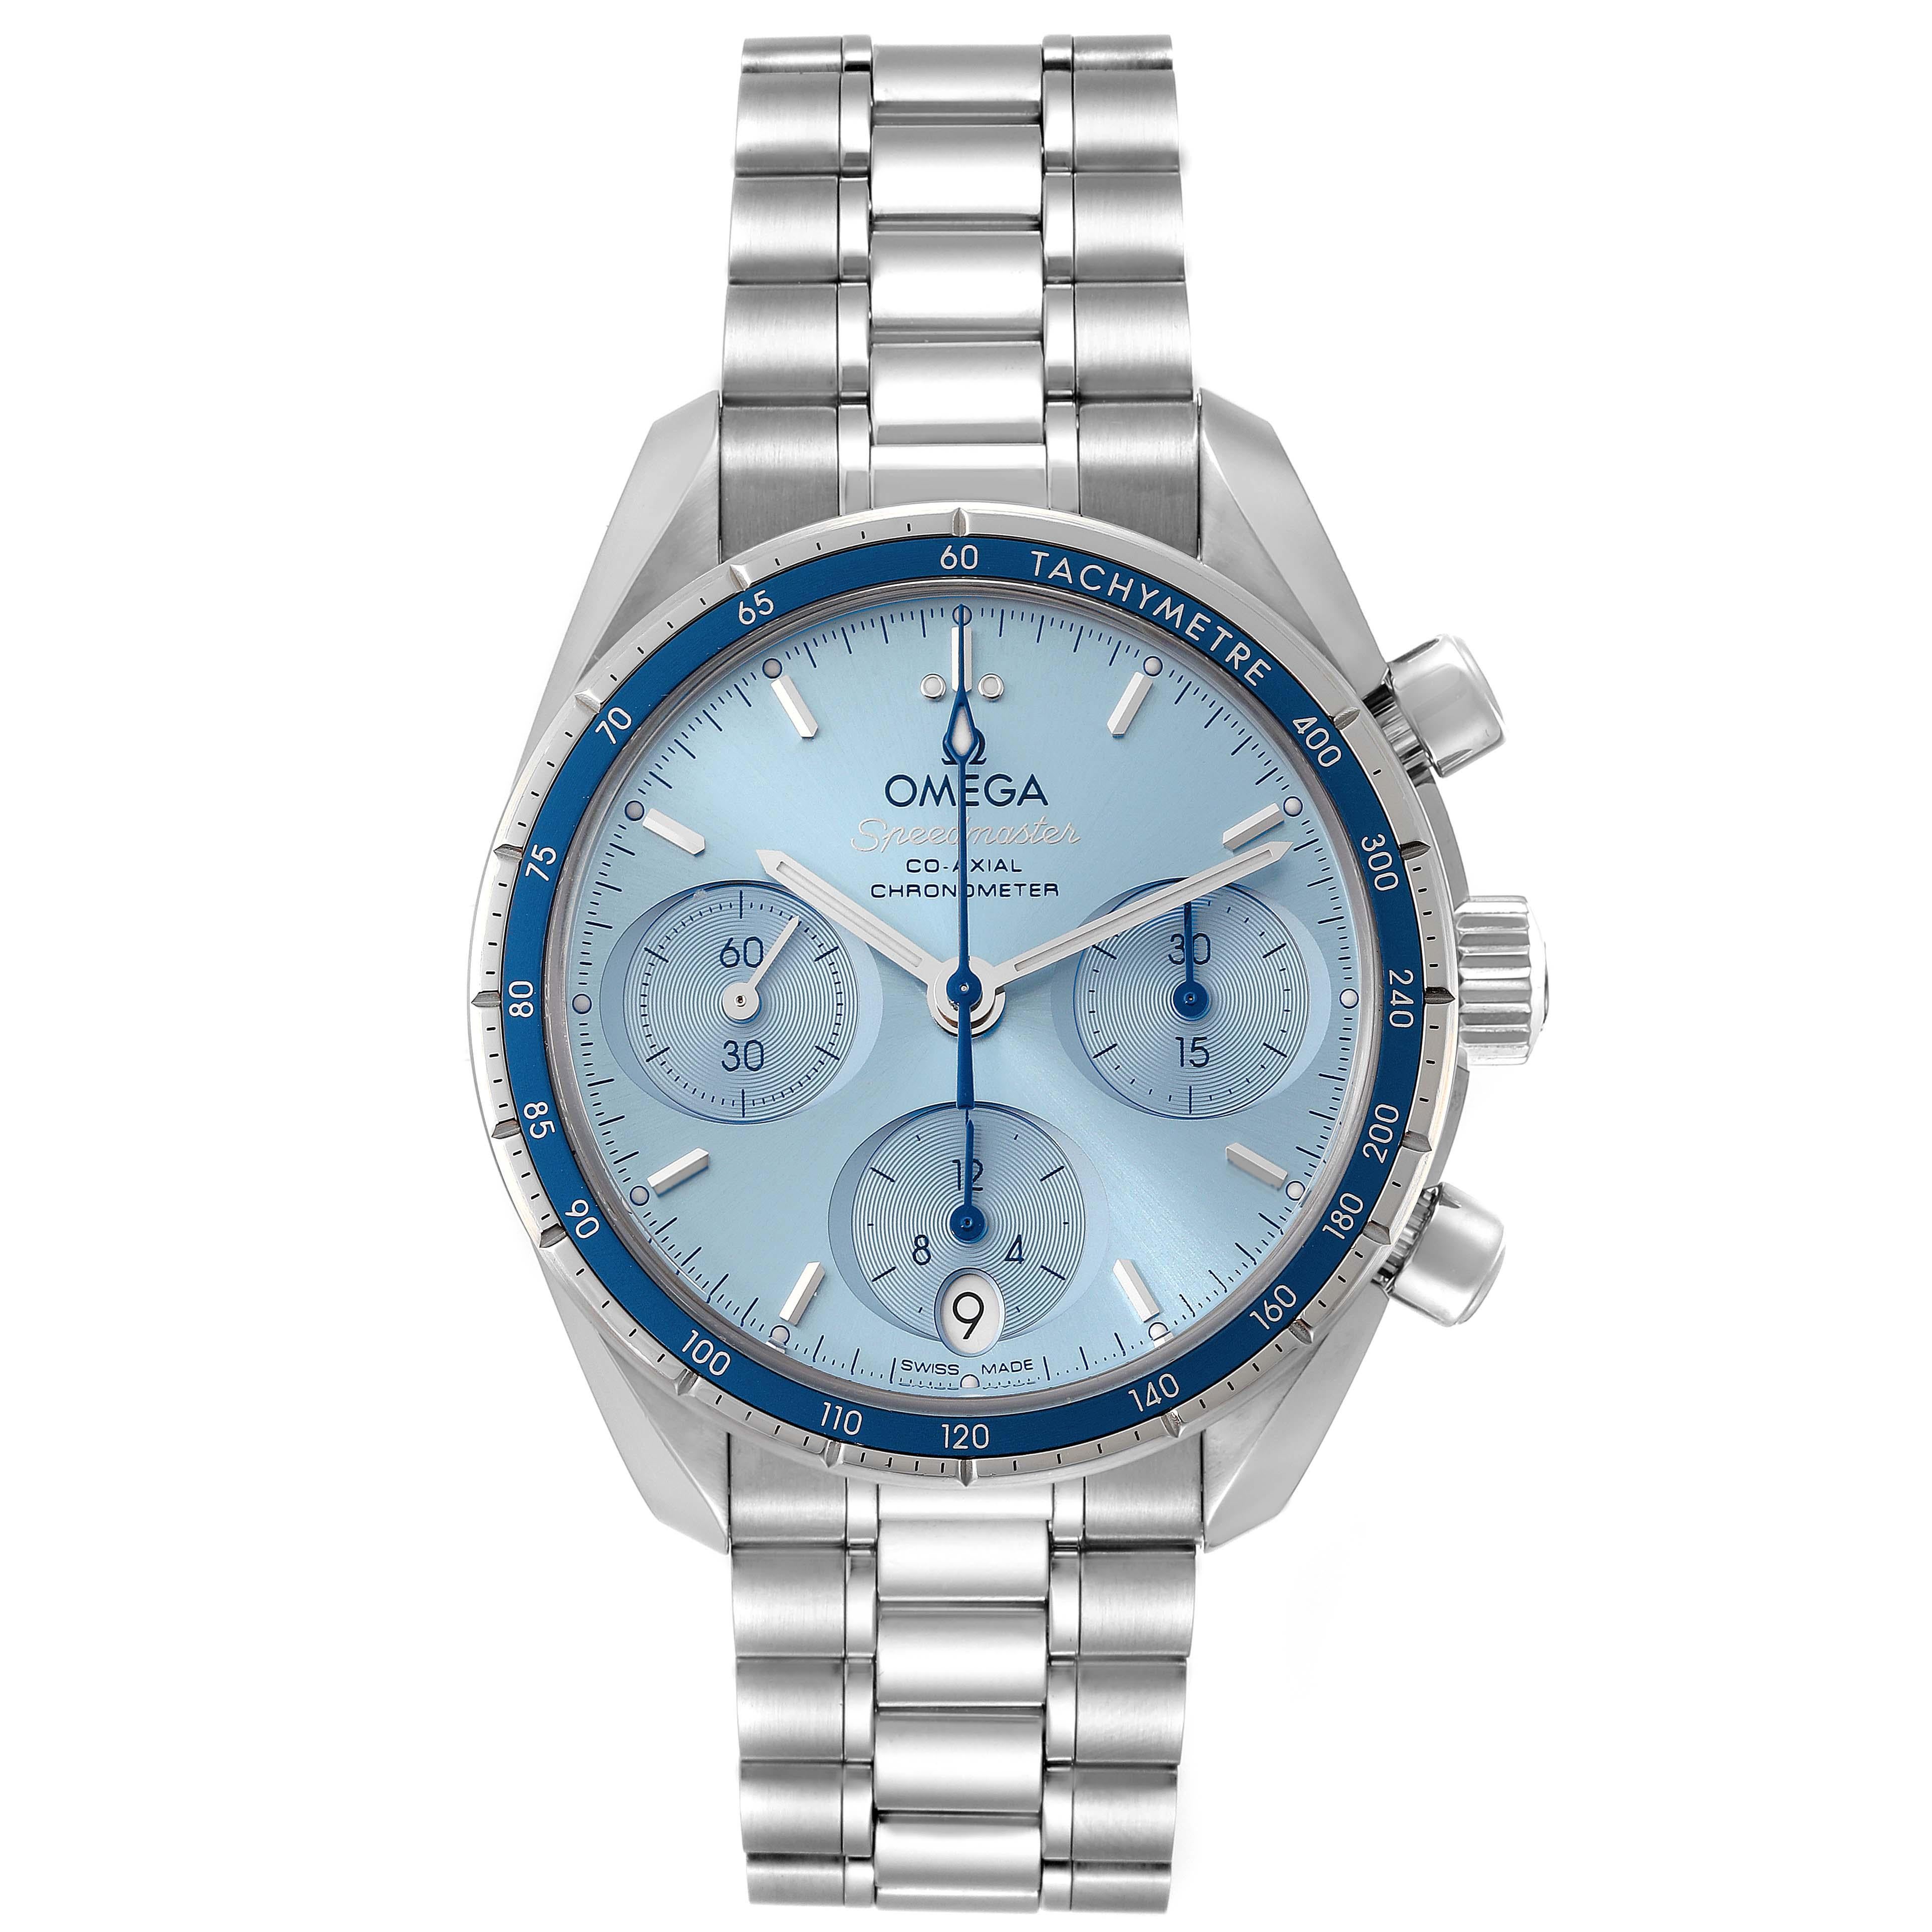 Omega Speedmaster Co-Axial Steel Mens Watch 324.30.38.50.03.001 Box Card. Automatic self-winding chronograph movement with column-wheel mechanism and Co-Axial escapement. Free sprung-balance equipped with Si14 silicon balance spring. Officially